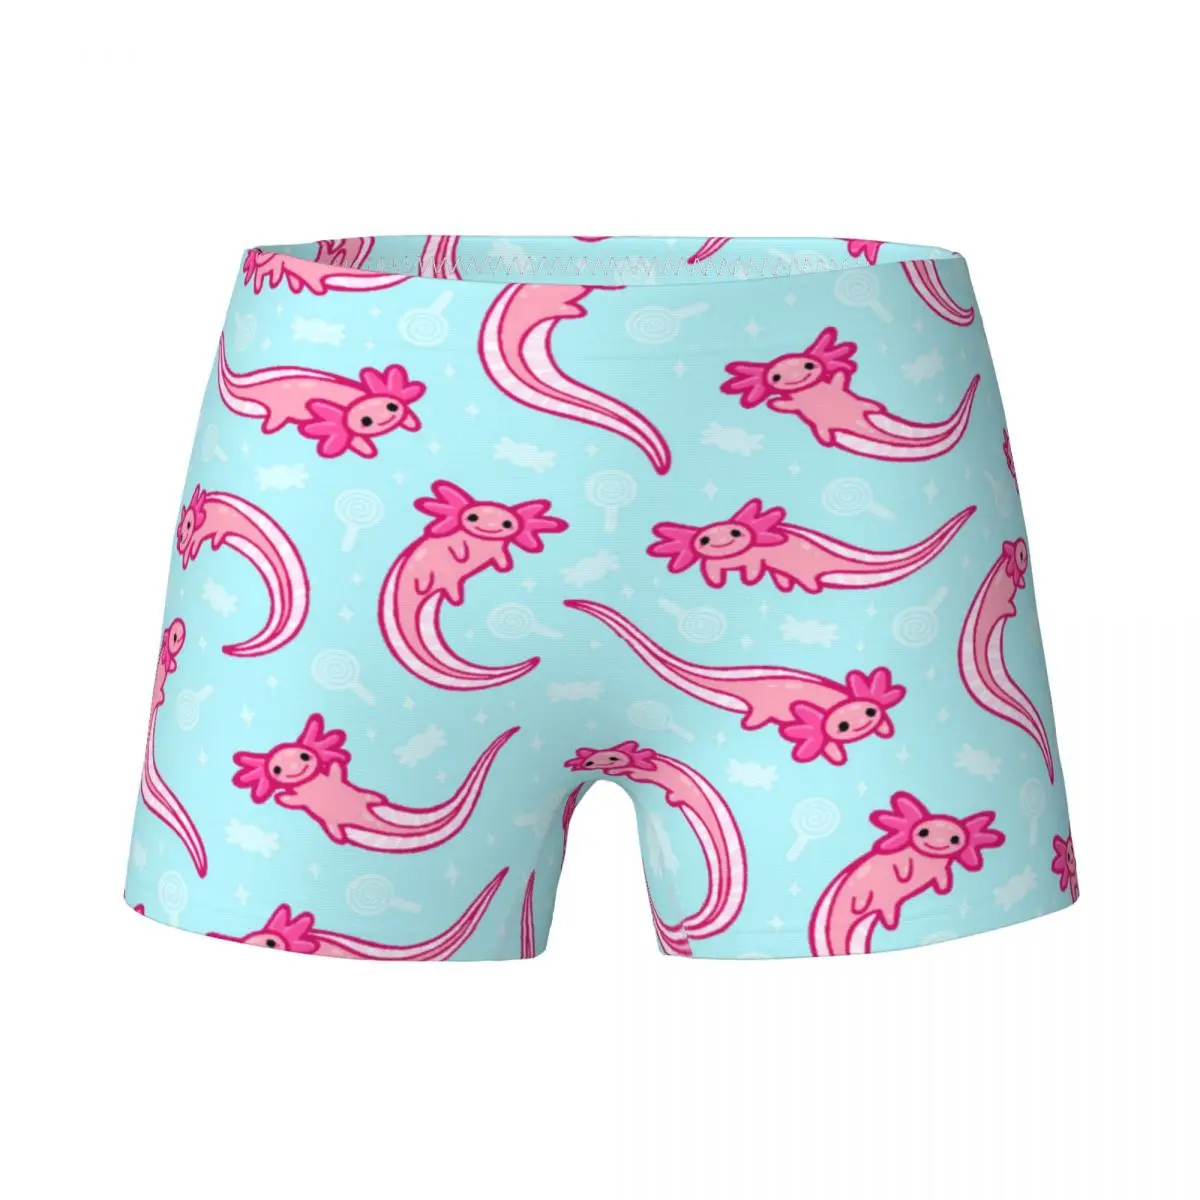 

Youth Girls Axolotl Animal Boxer Children's Cotton Underwear Teenagers Cute Salamander Underpants Breathable Briefs Size 4T-15T